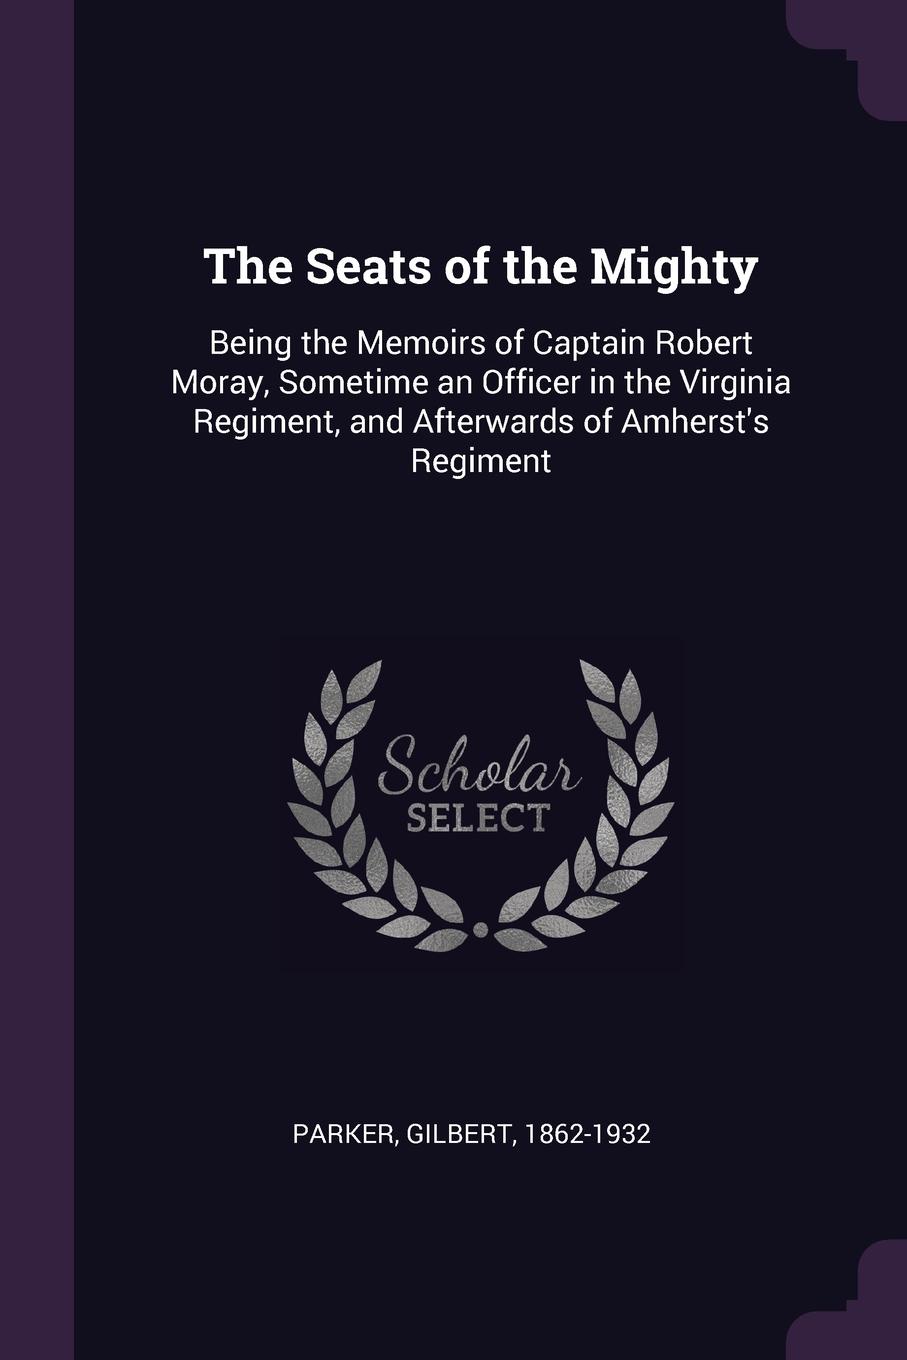 The Seats of the Mighty. Being the Memoirs of Captain Robert Moray, Sometime an Officer in the Virginia Regiment, and Afterwards of Amherst.s Regiment